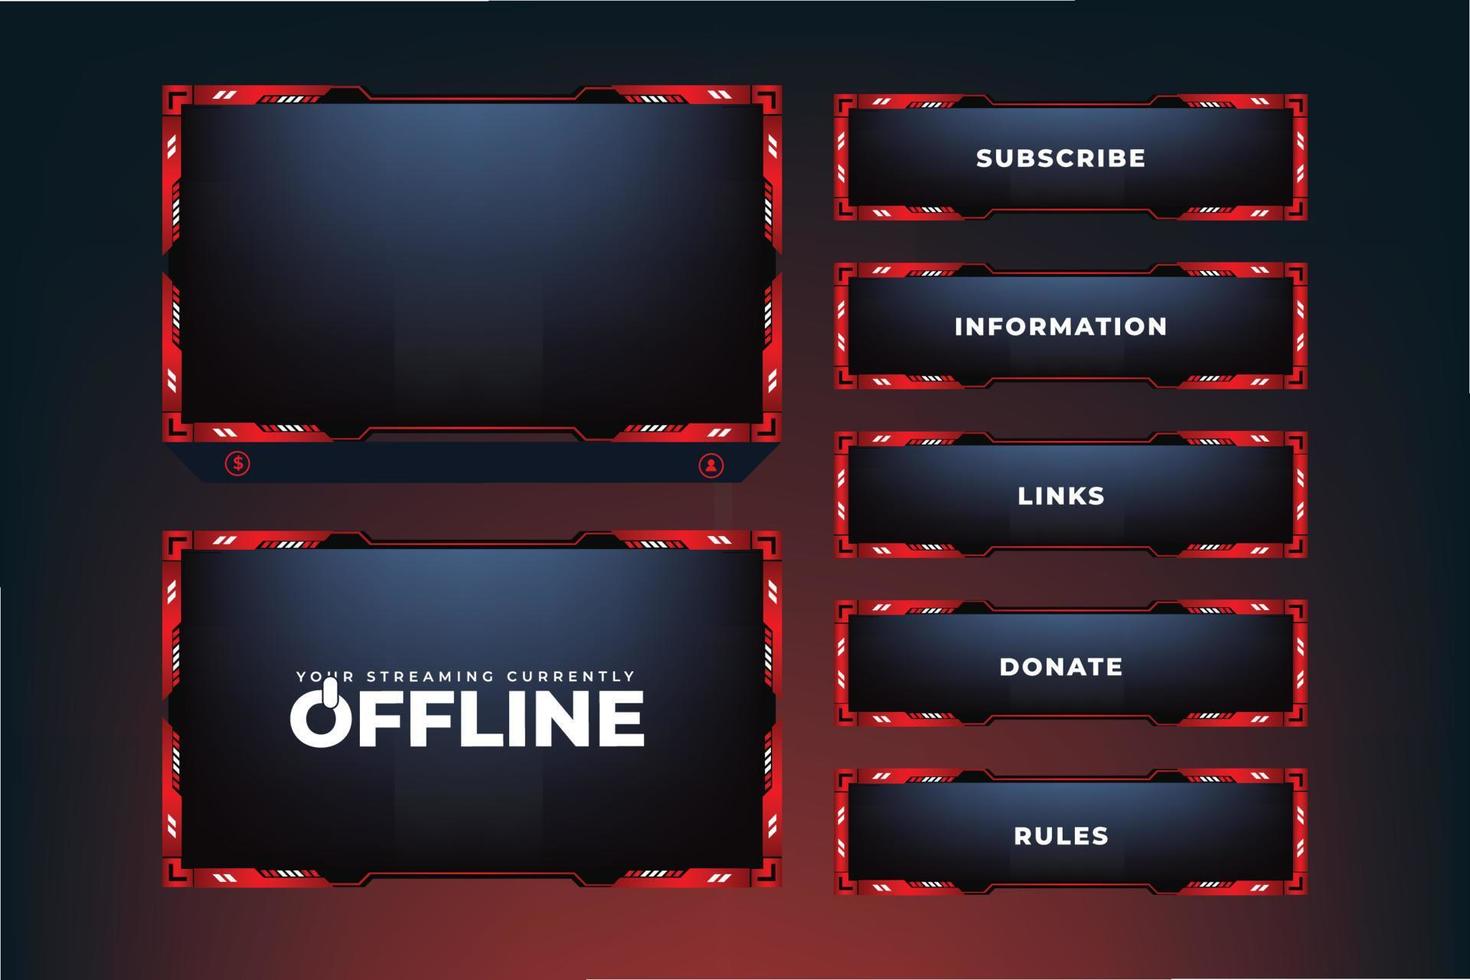 Futuristic red gaming overlay vector with abstract shapes. Online gaming screen panel decoration with offline screen and buttons. Live streaming overlay screen interface template for online gamers.